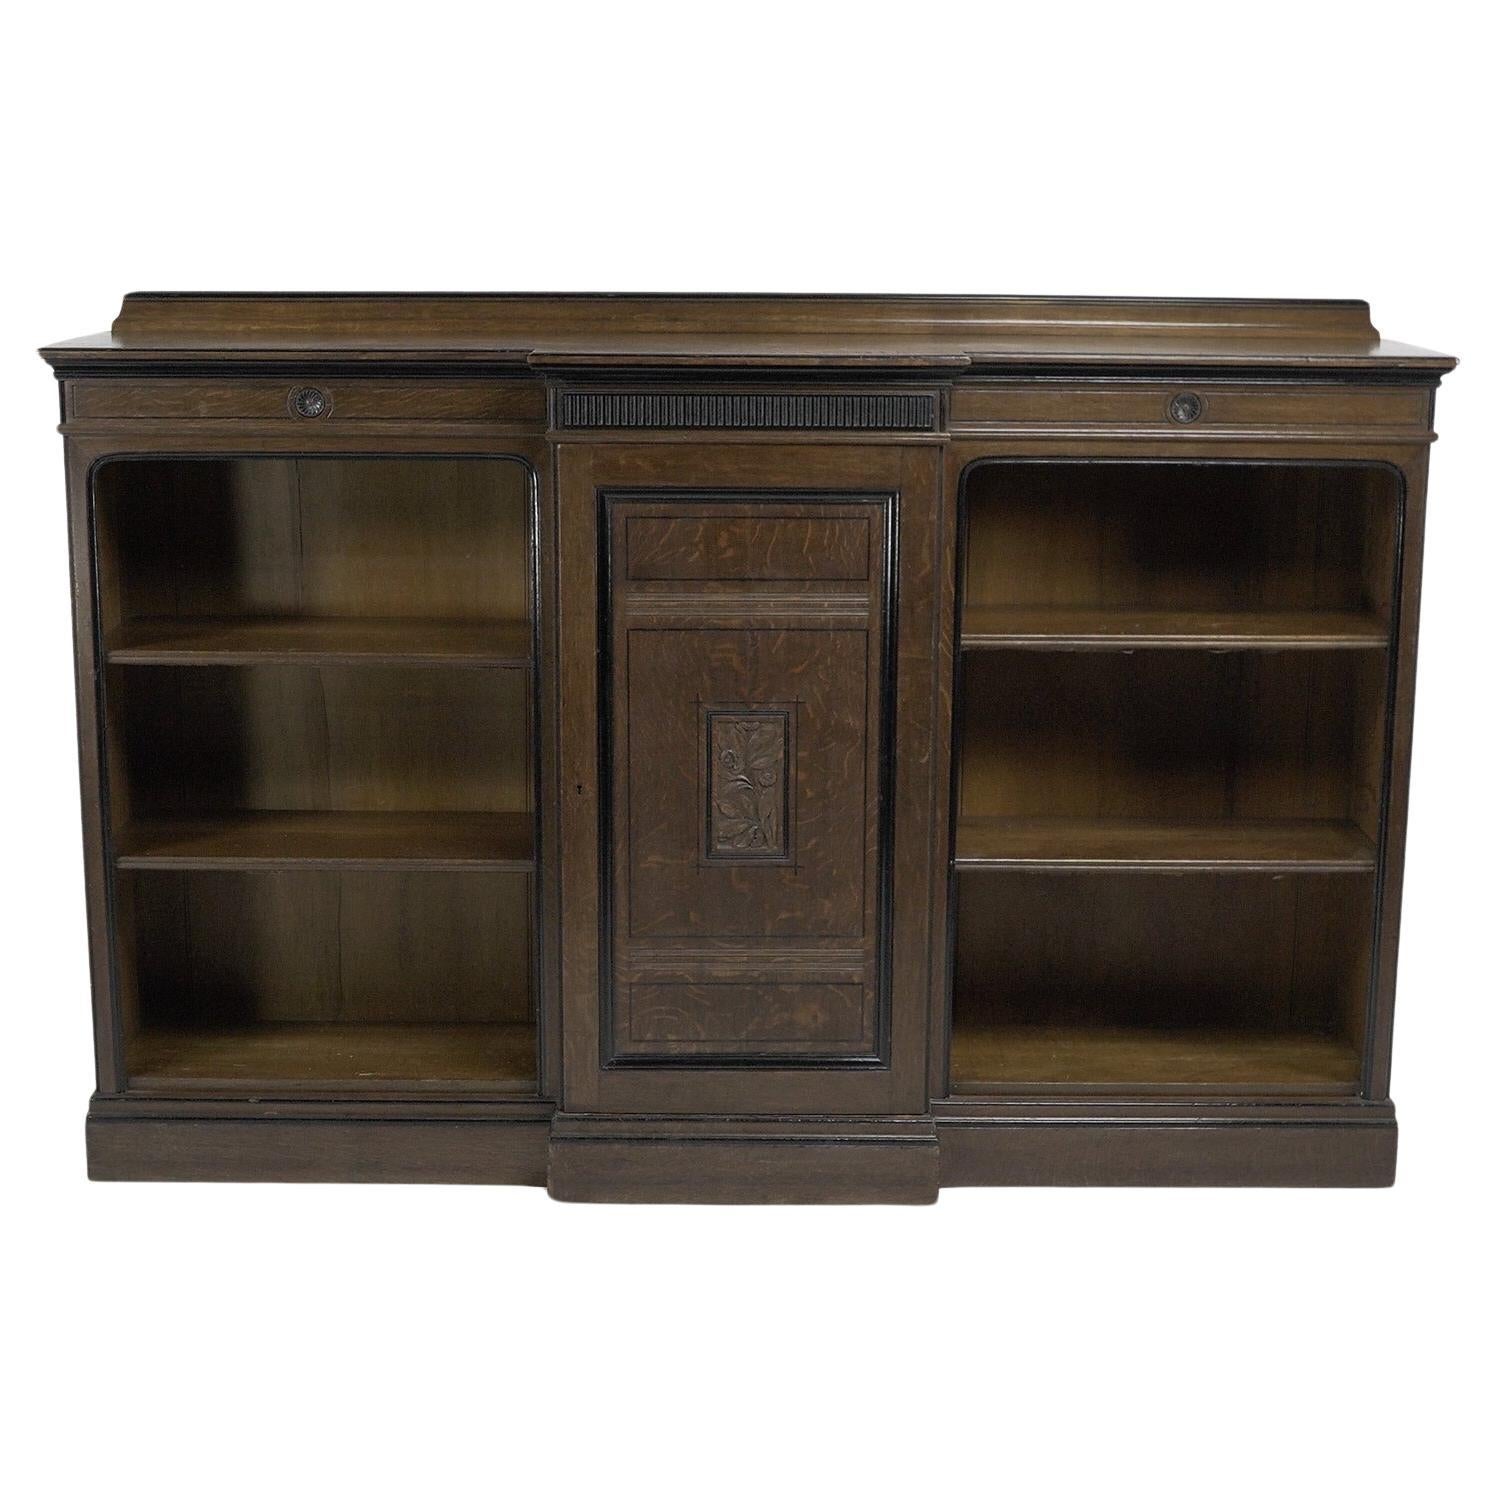 Lambs of Manchester (stamped). A fine Aesthetic Movement oak breakfront bookcase For Sale